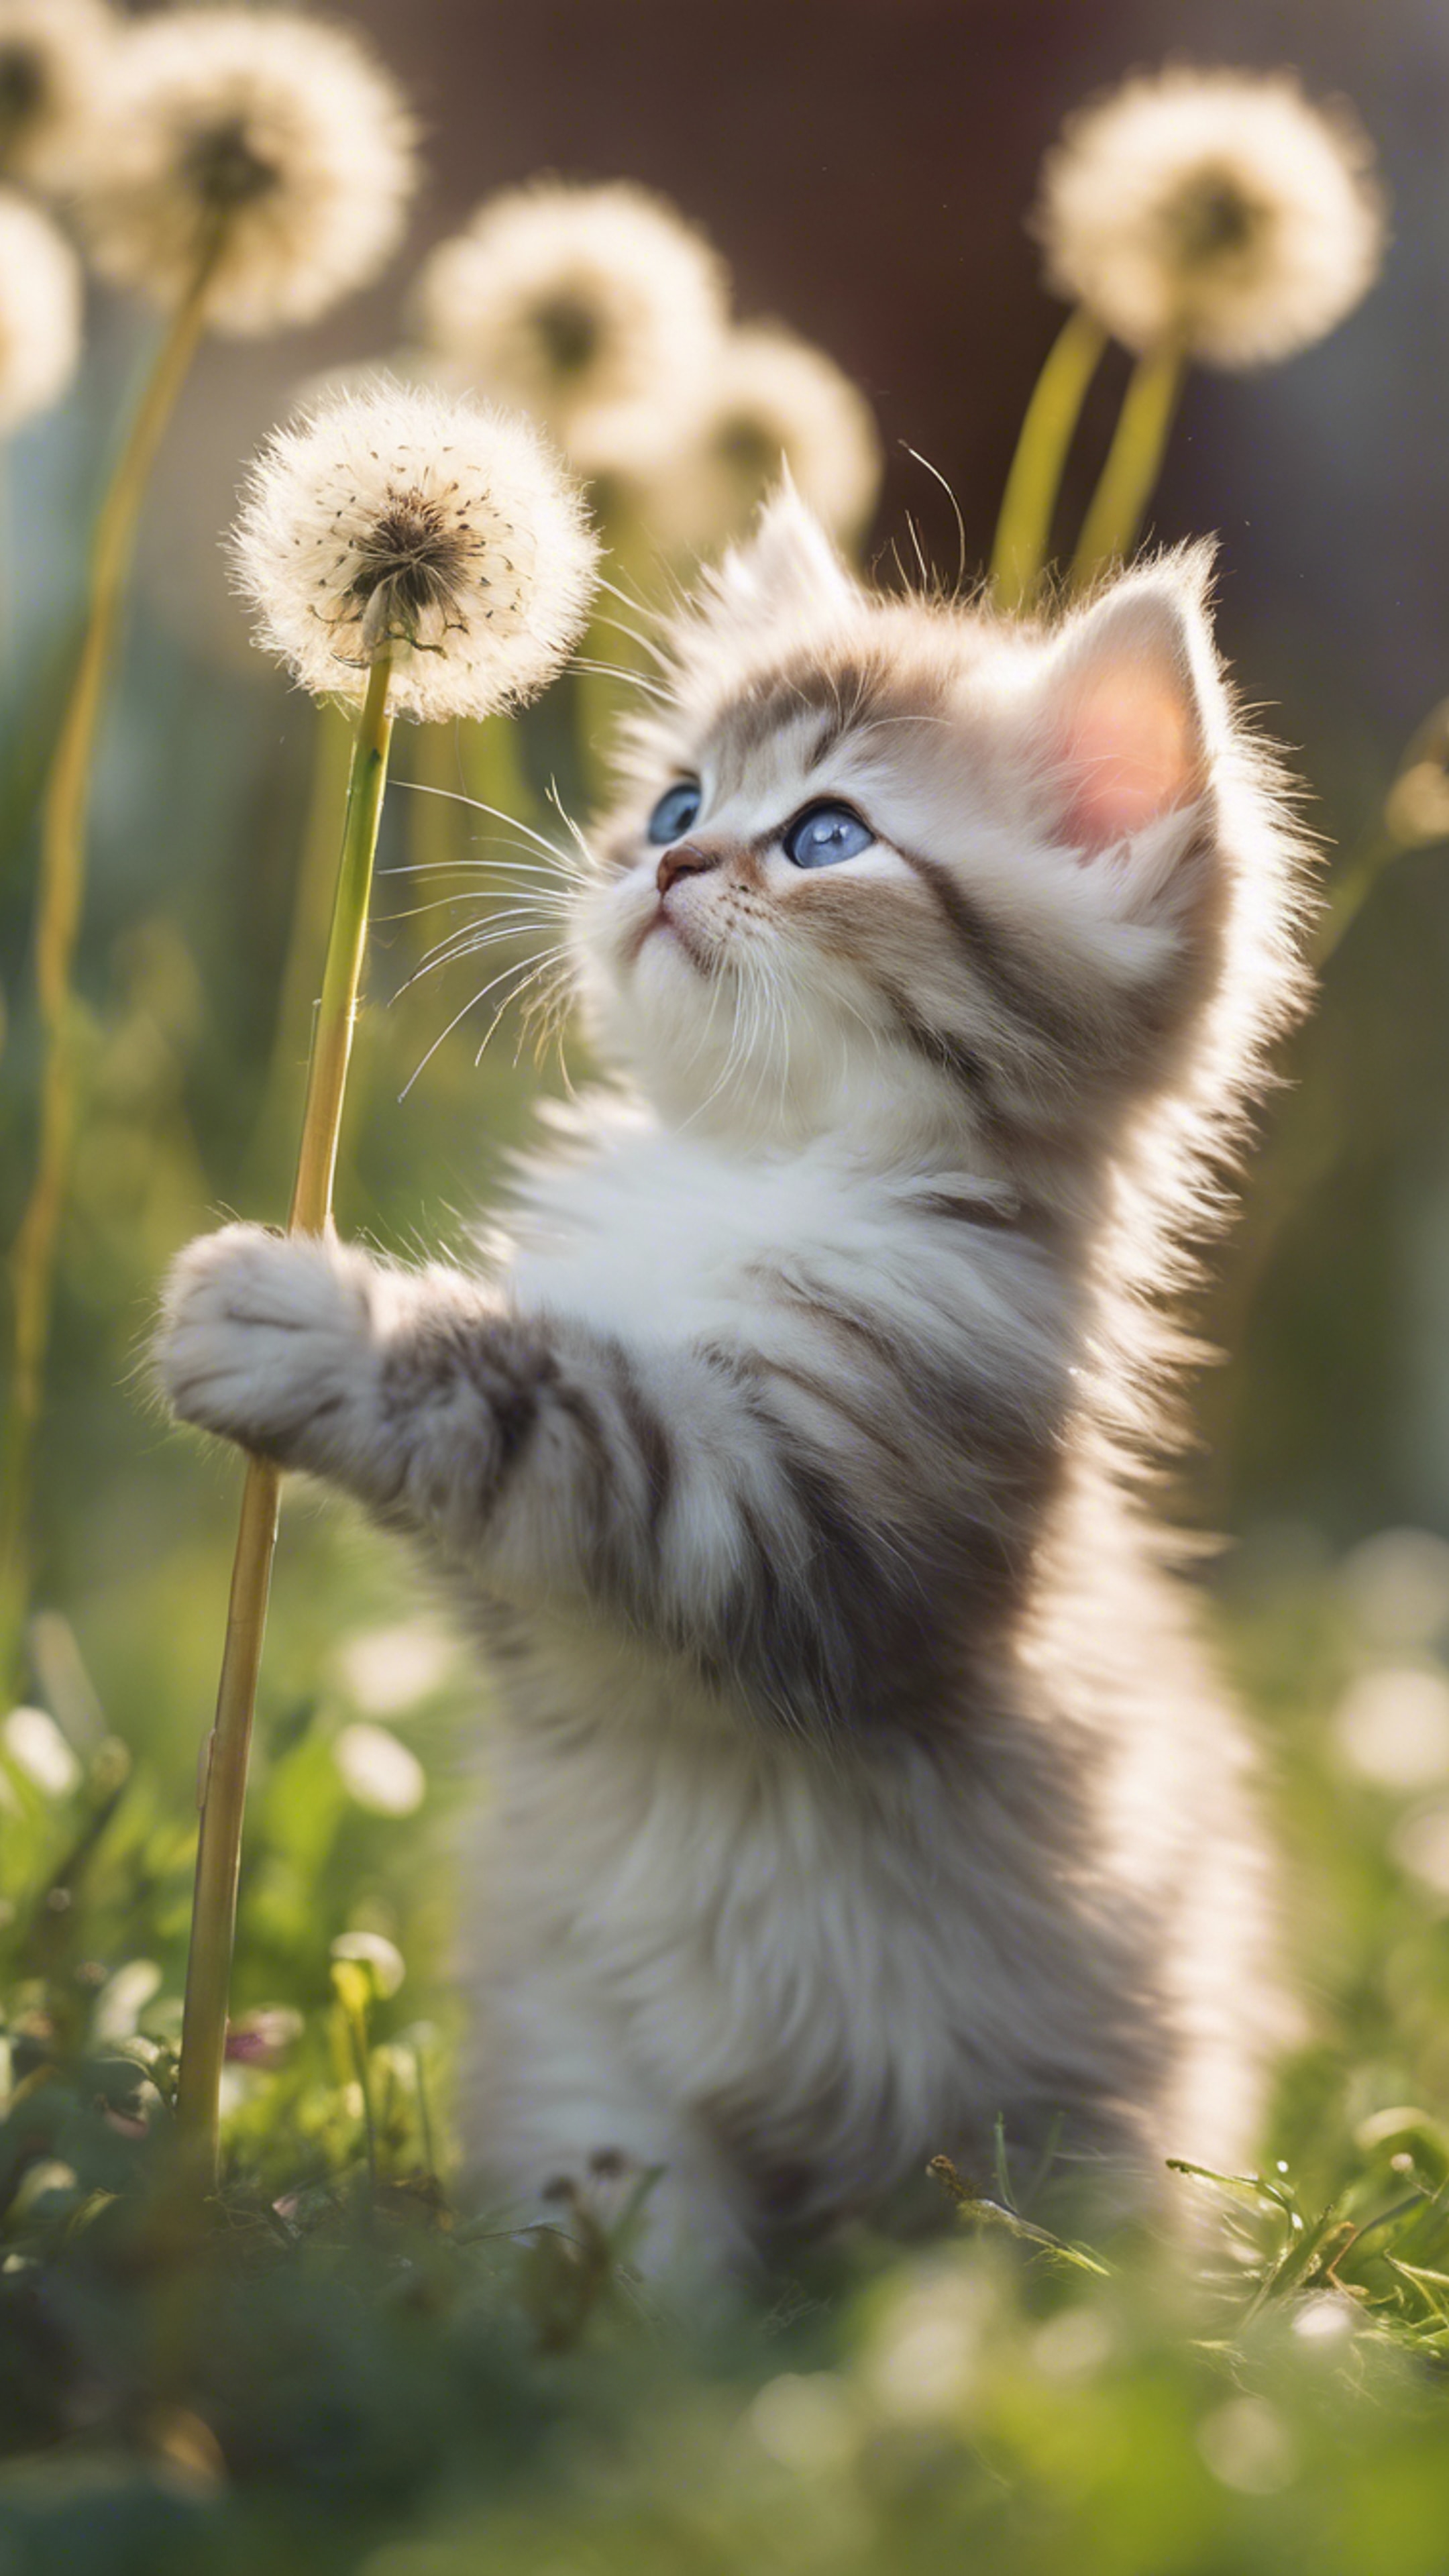 A curious Persian kitten playfully batting at a dandelishion puff in the midst of spring bloom. Wallpaper[a1f5779e66044a4f83a1]